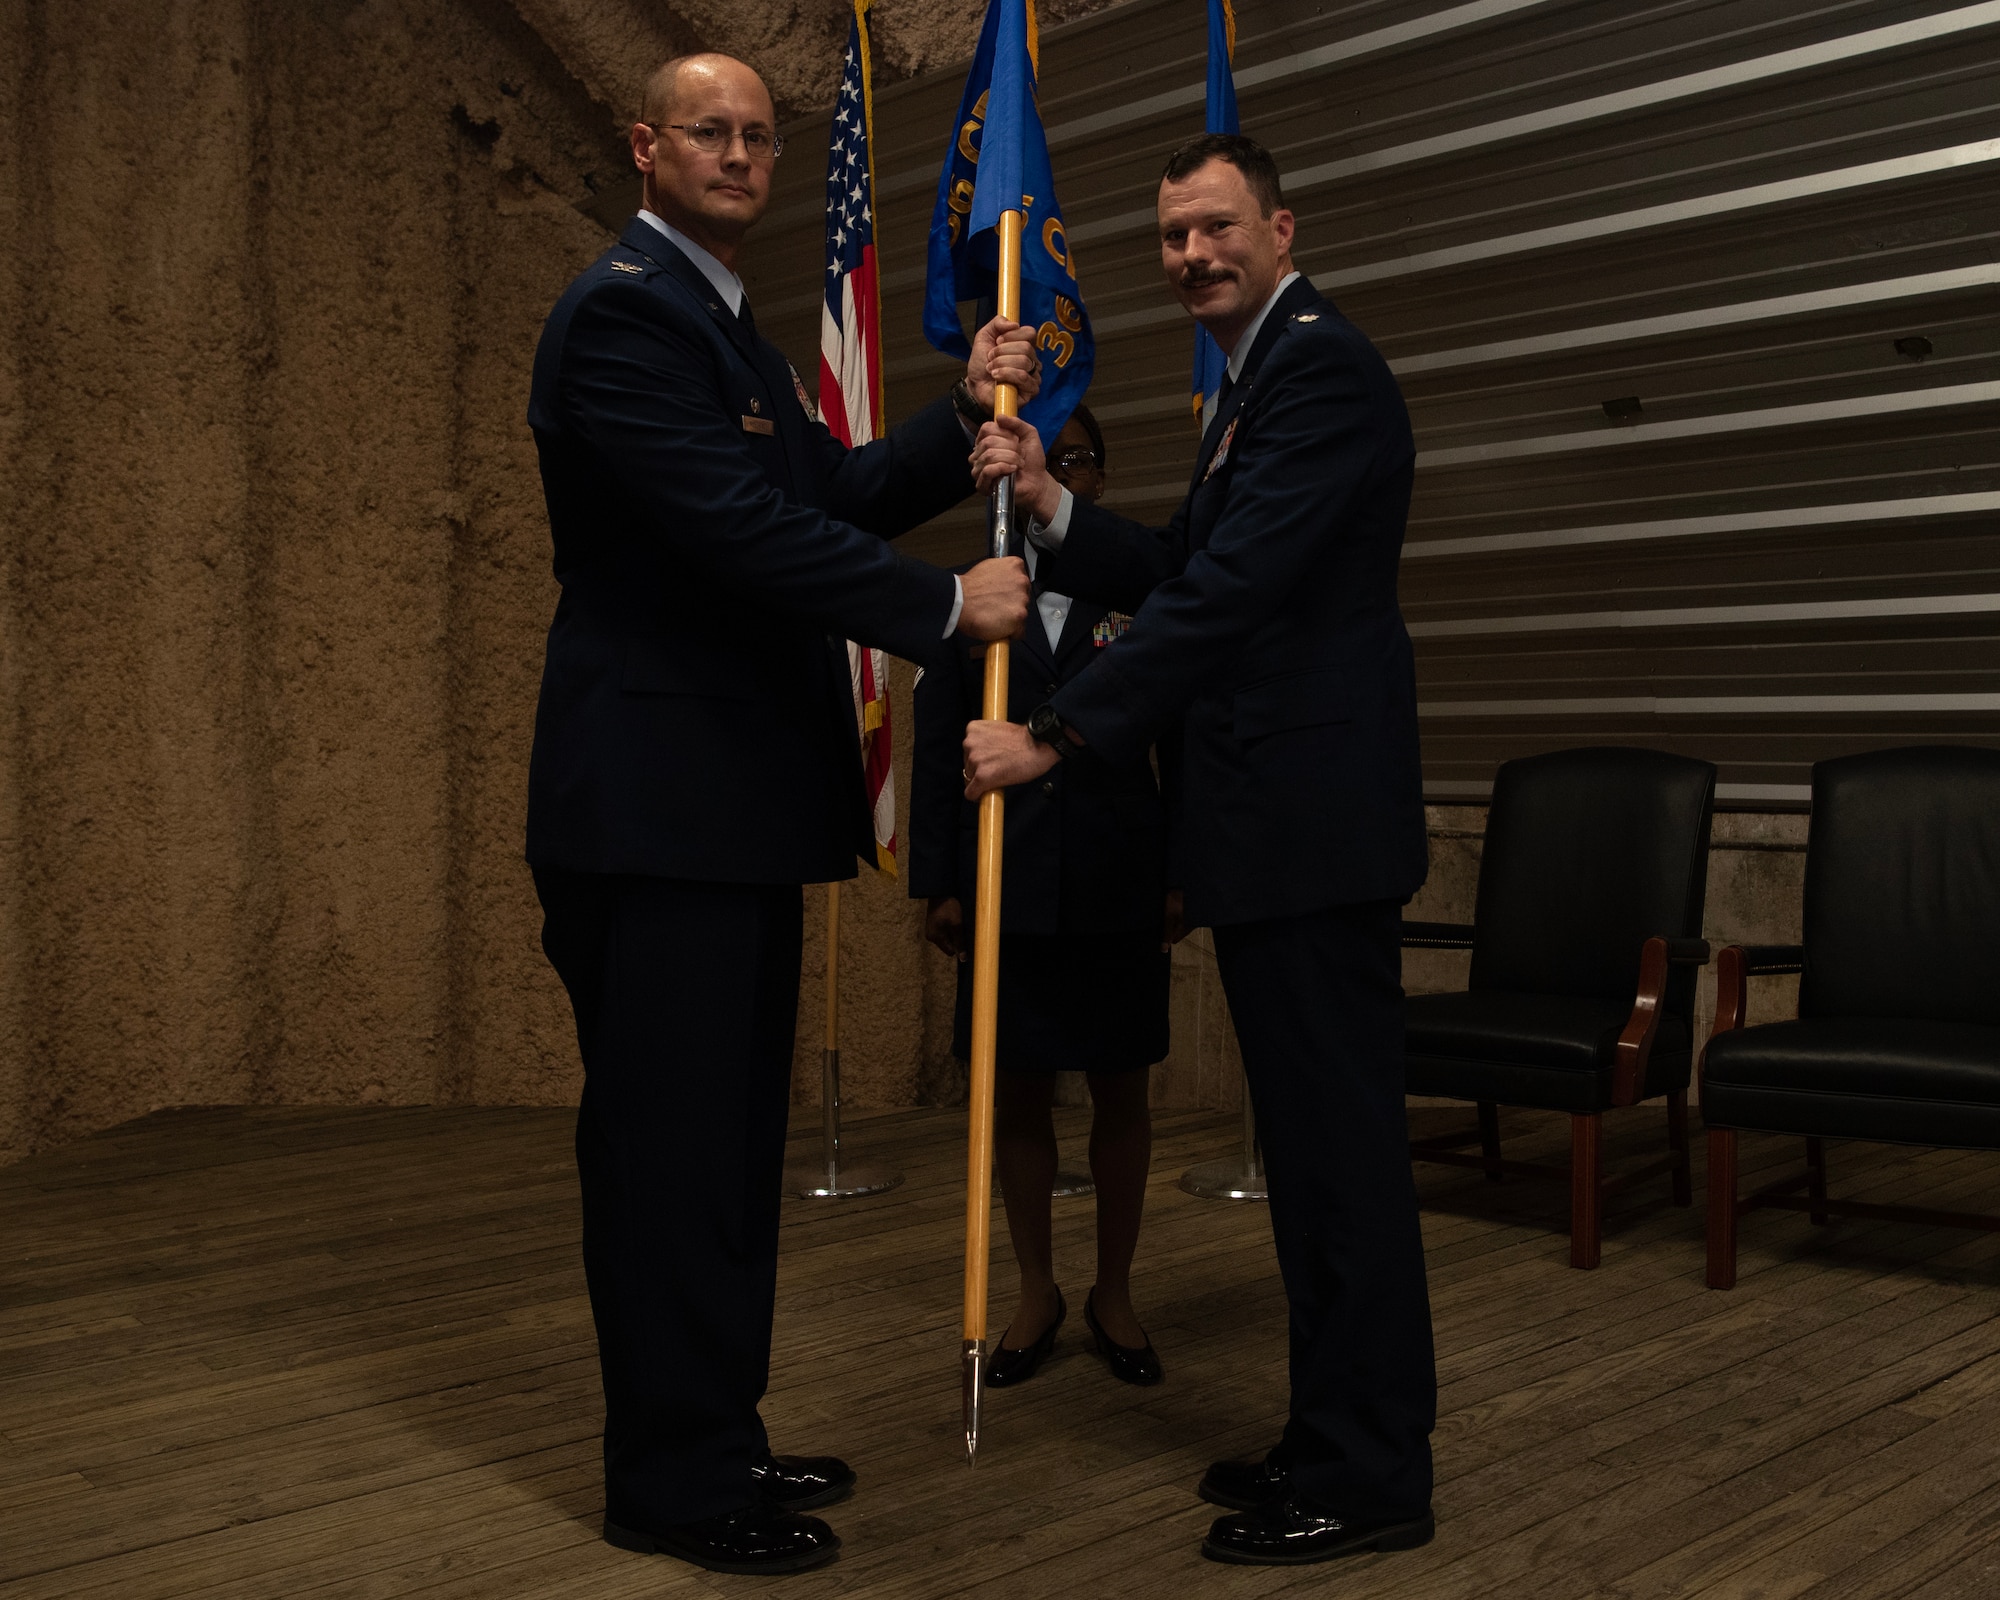 A Lt. Col. and a Col. holds a guidon